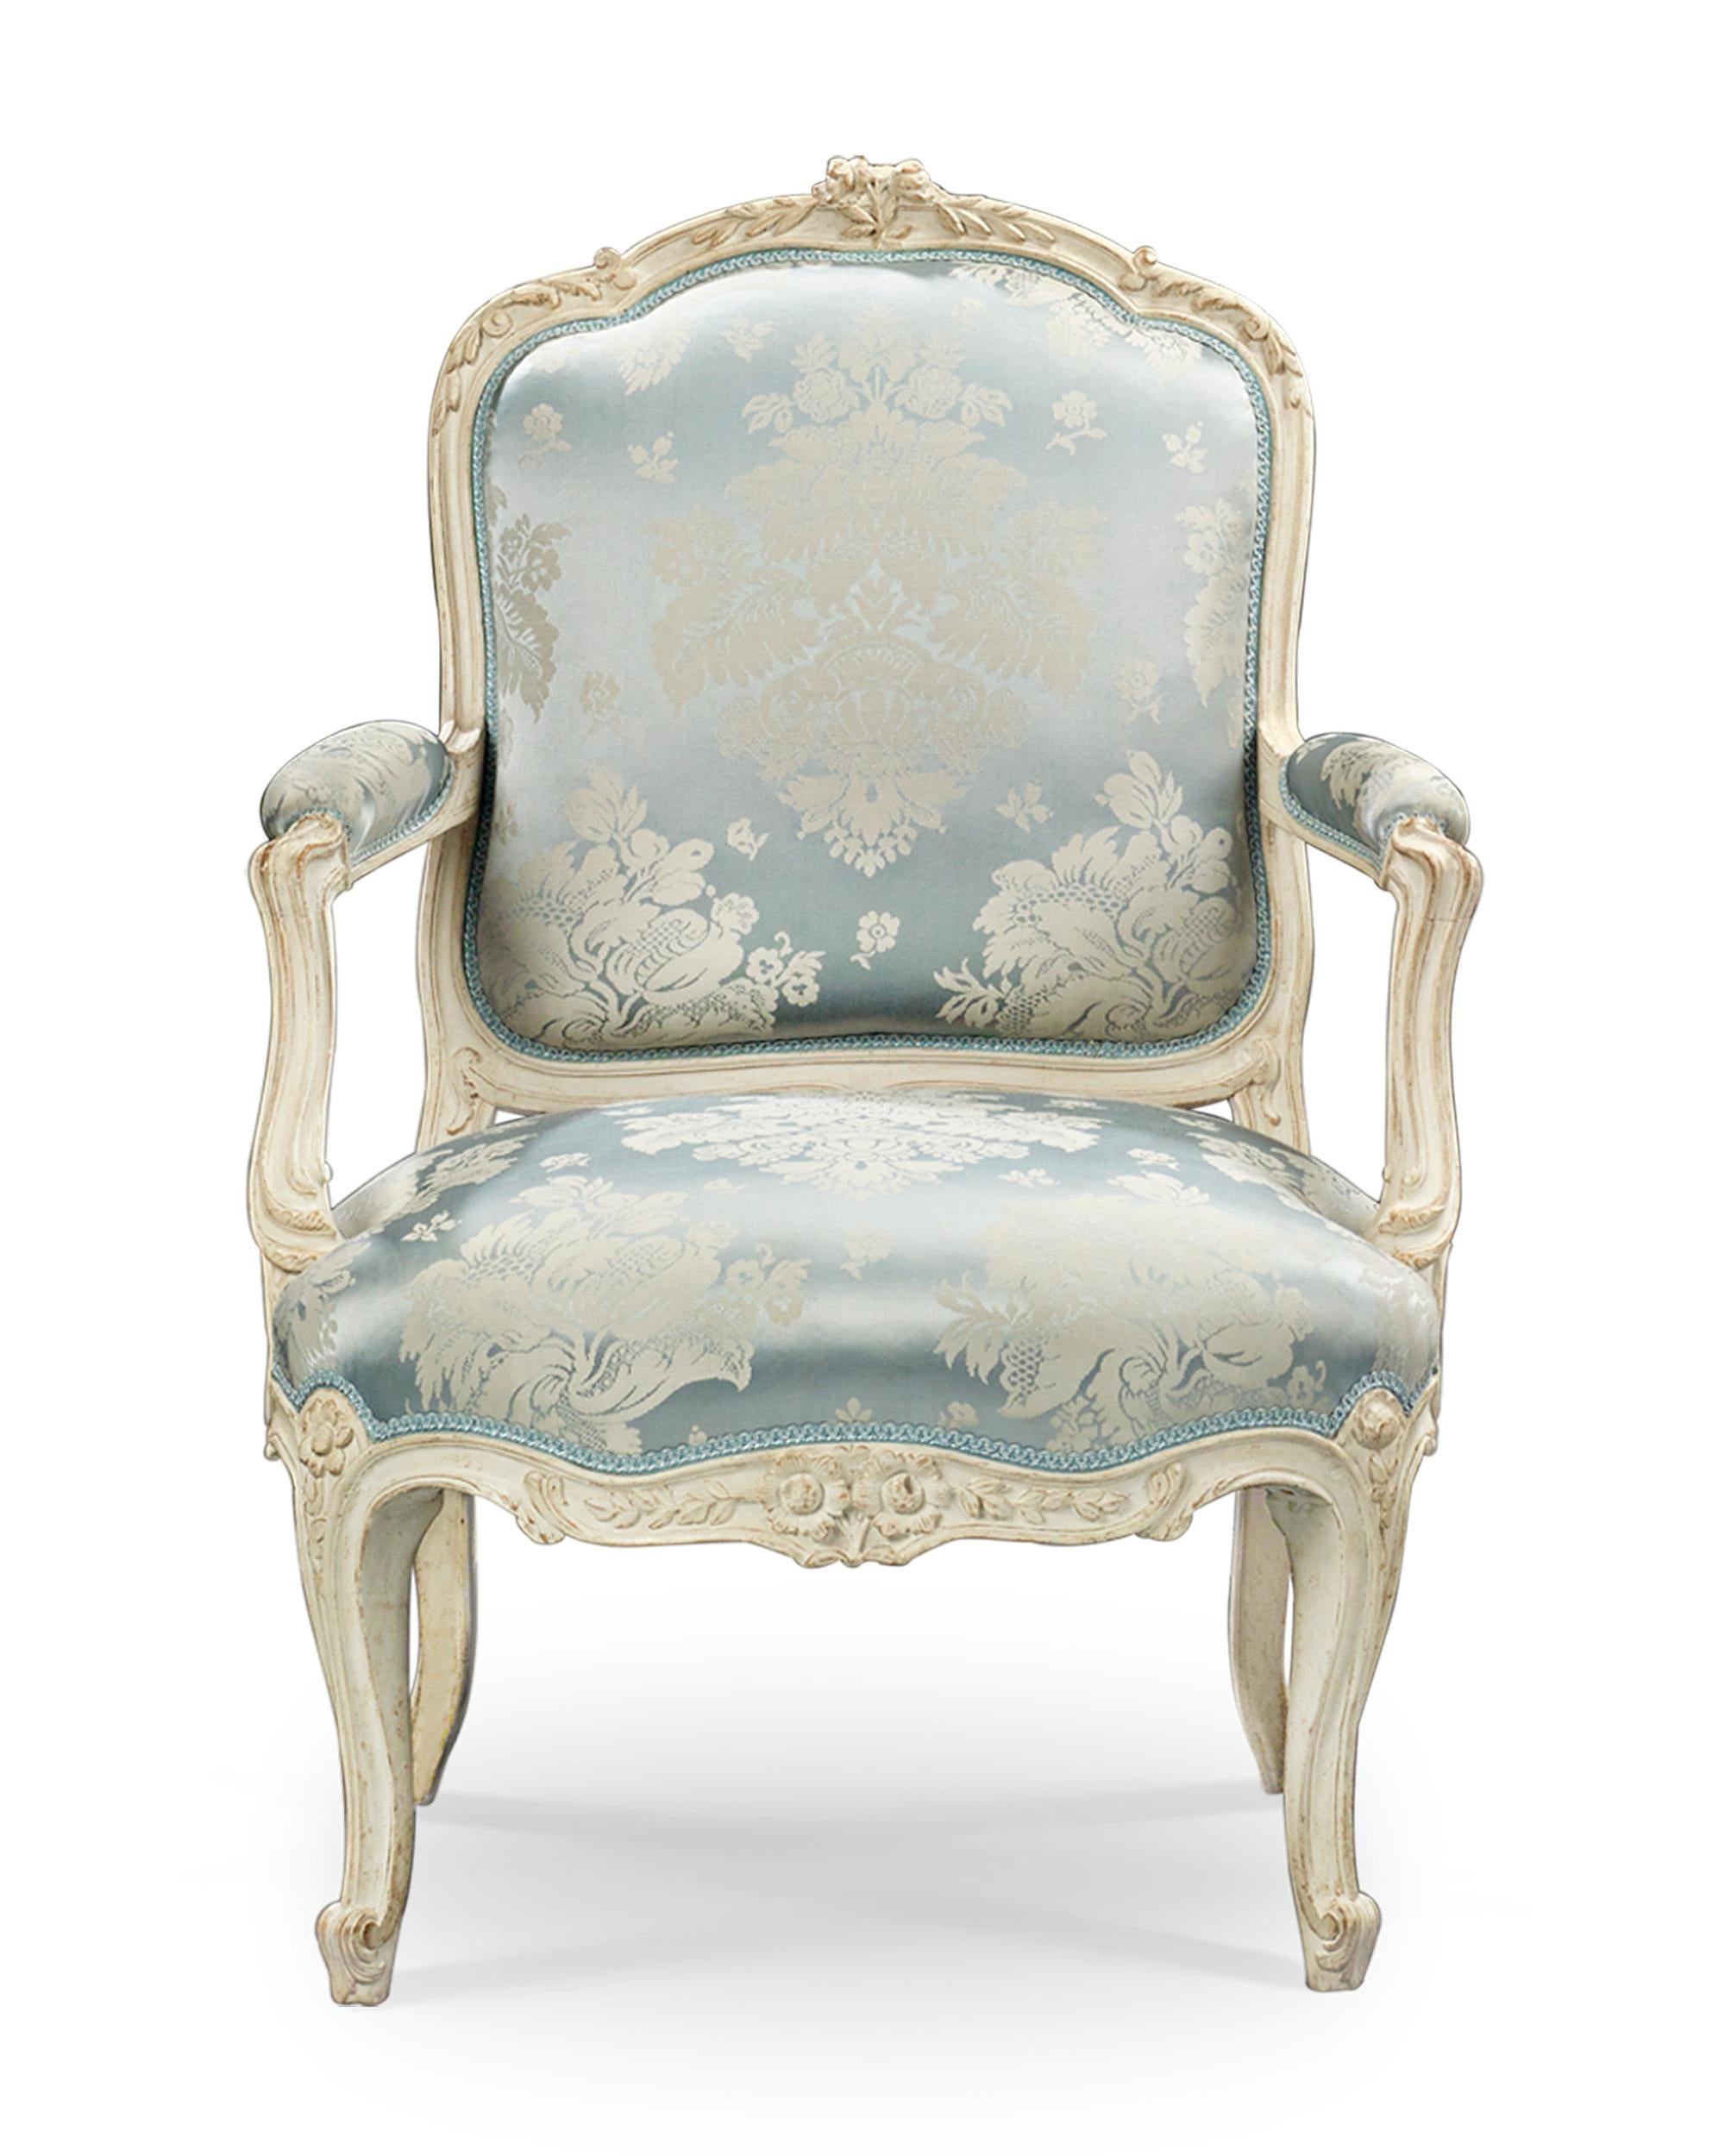 This impressive pair of French armchairs displays the splendor and elegance of the Louis XV period. Crafted by the famed ébéniste Jean-René Nadal l'Ainé (1733-1783), the chairs are exquisitely constructed with graceful, curving lines and elegant